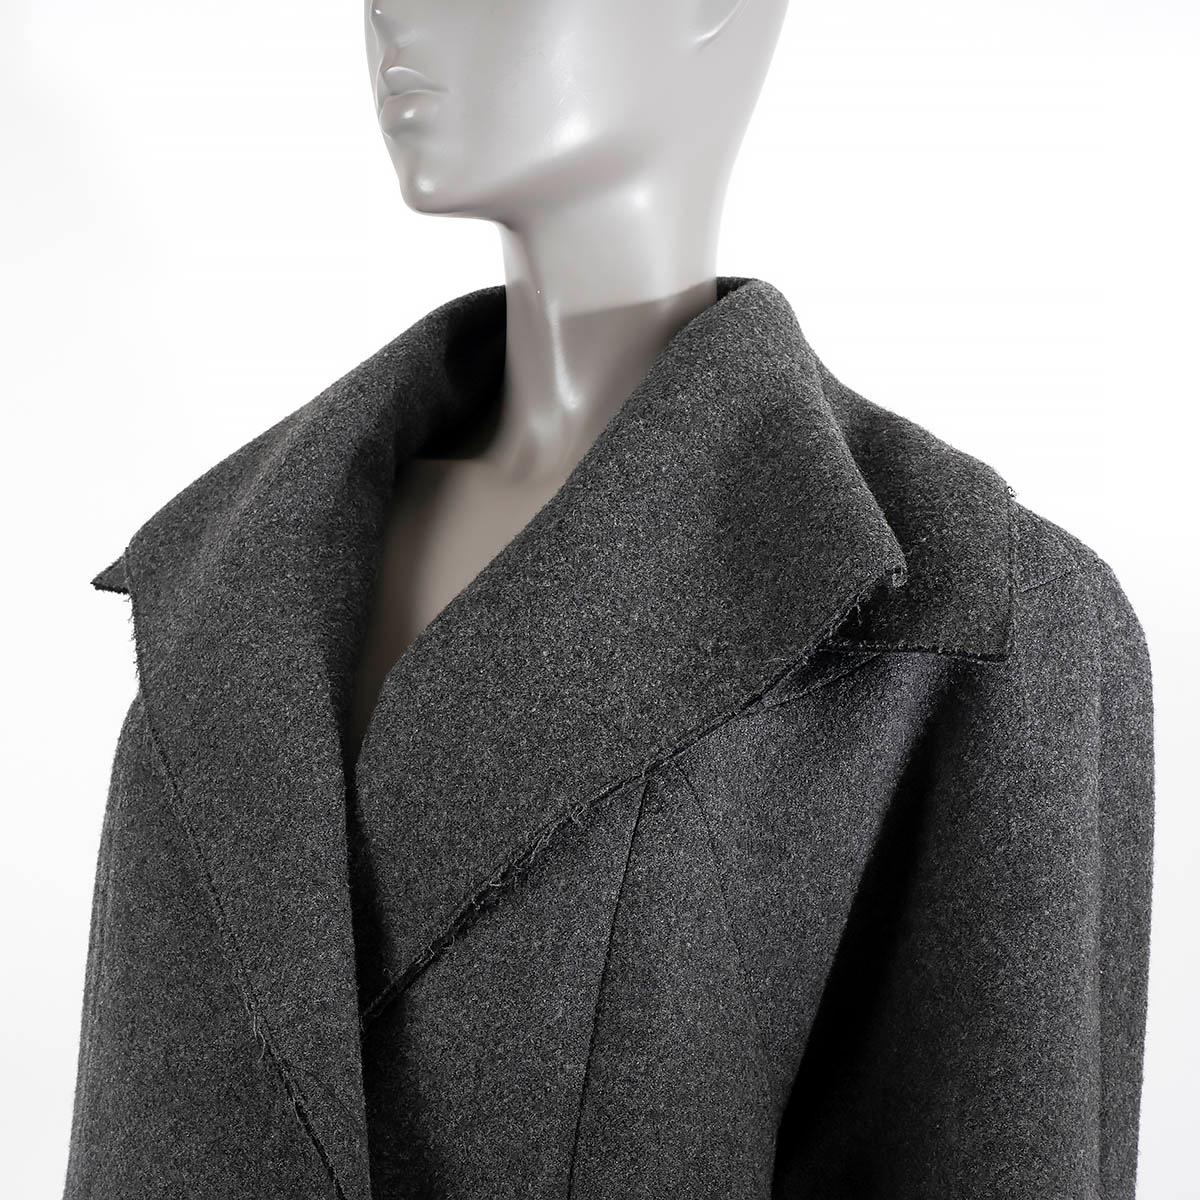 CHANEL anthracite grey wool 2011 11A BYZANCE DOUBLE BREASTED Coat Jacket 46 XL For Sale 3